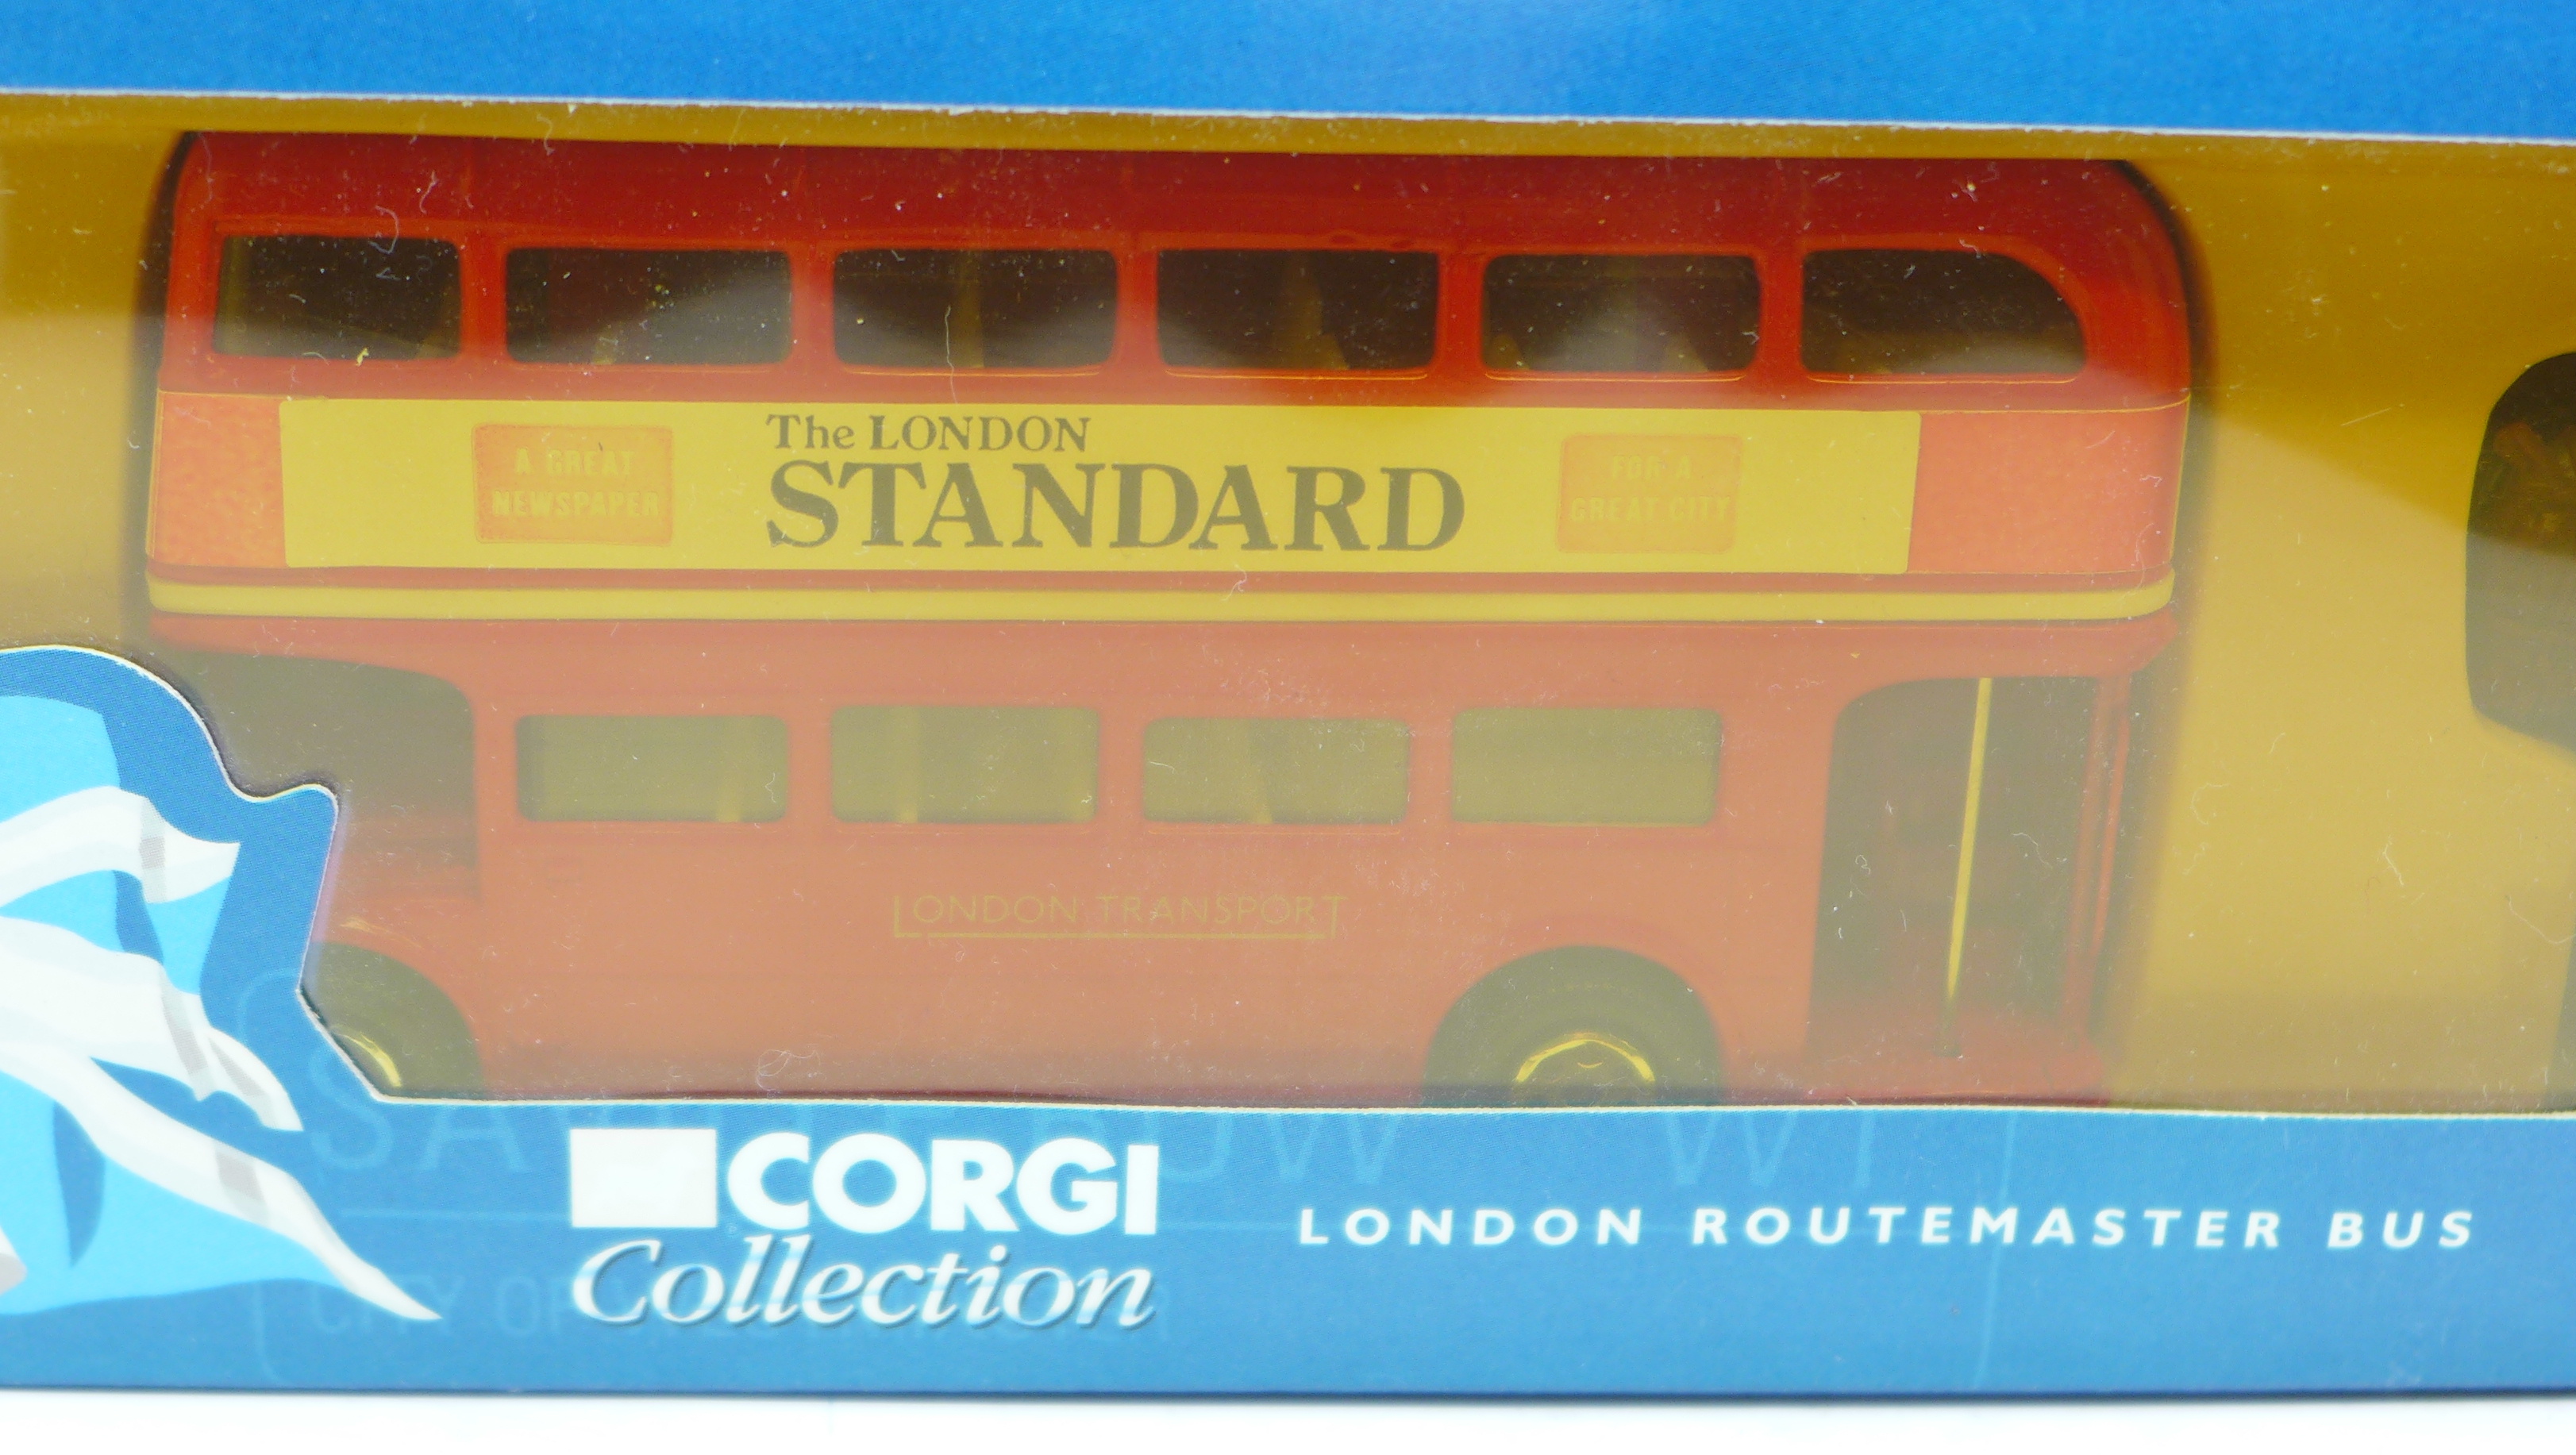 A Corgi Collection, 60003, London Gift Set, Routemaster bus, mounted Policeman and Taxi, boxed - Image 4 of 8